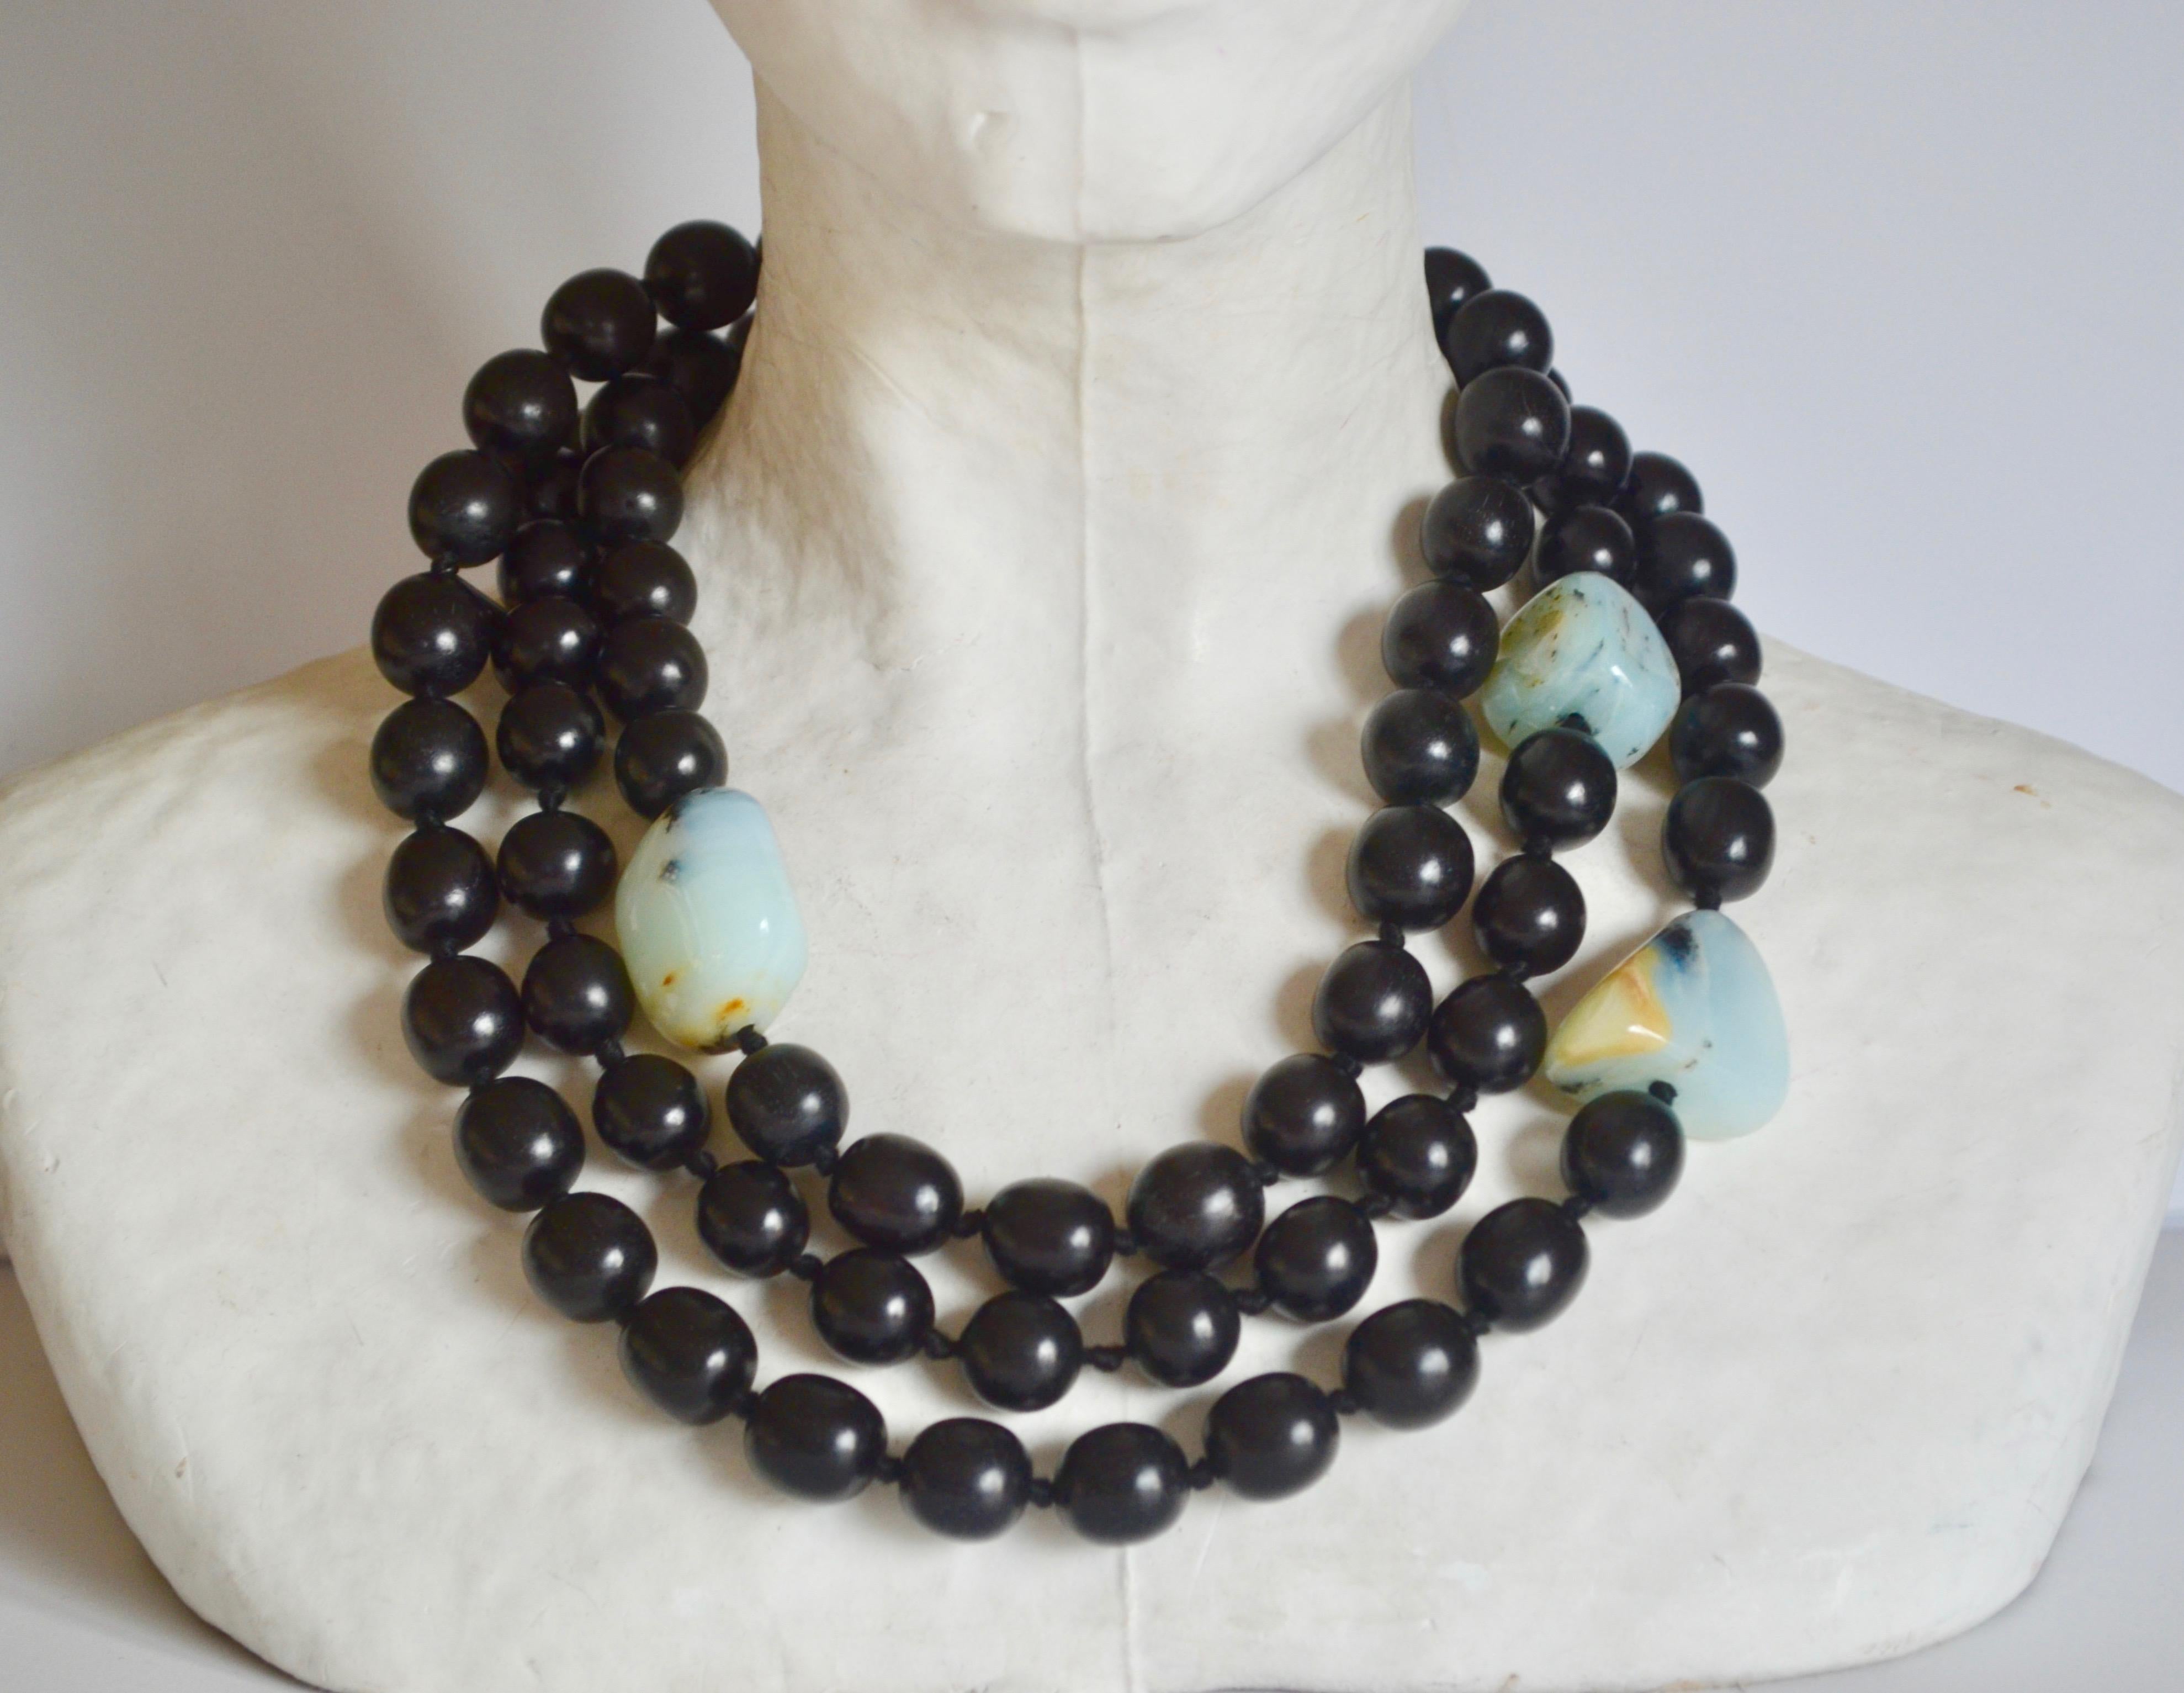 One of a kind wood bead necklace with blue peruvian opal stones from Monies Denmark.